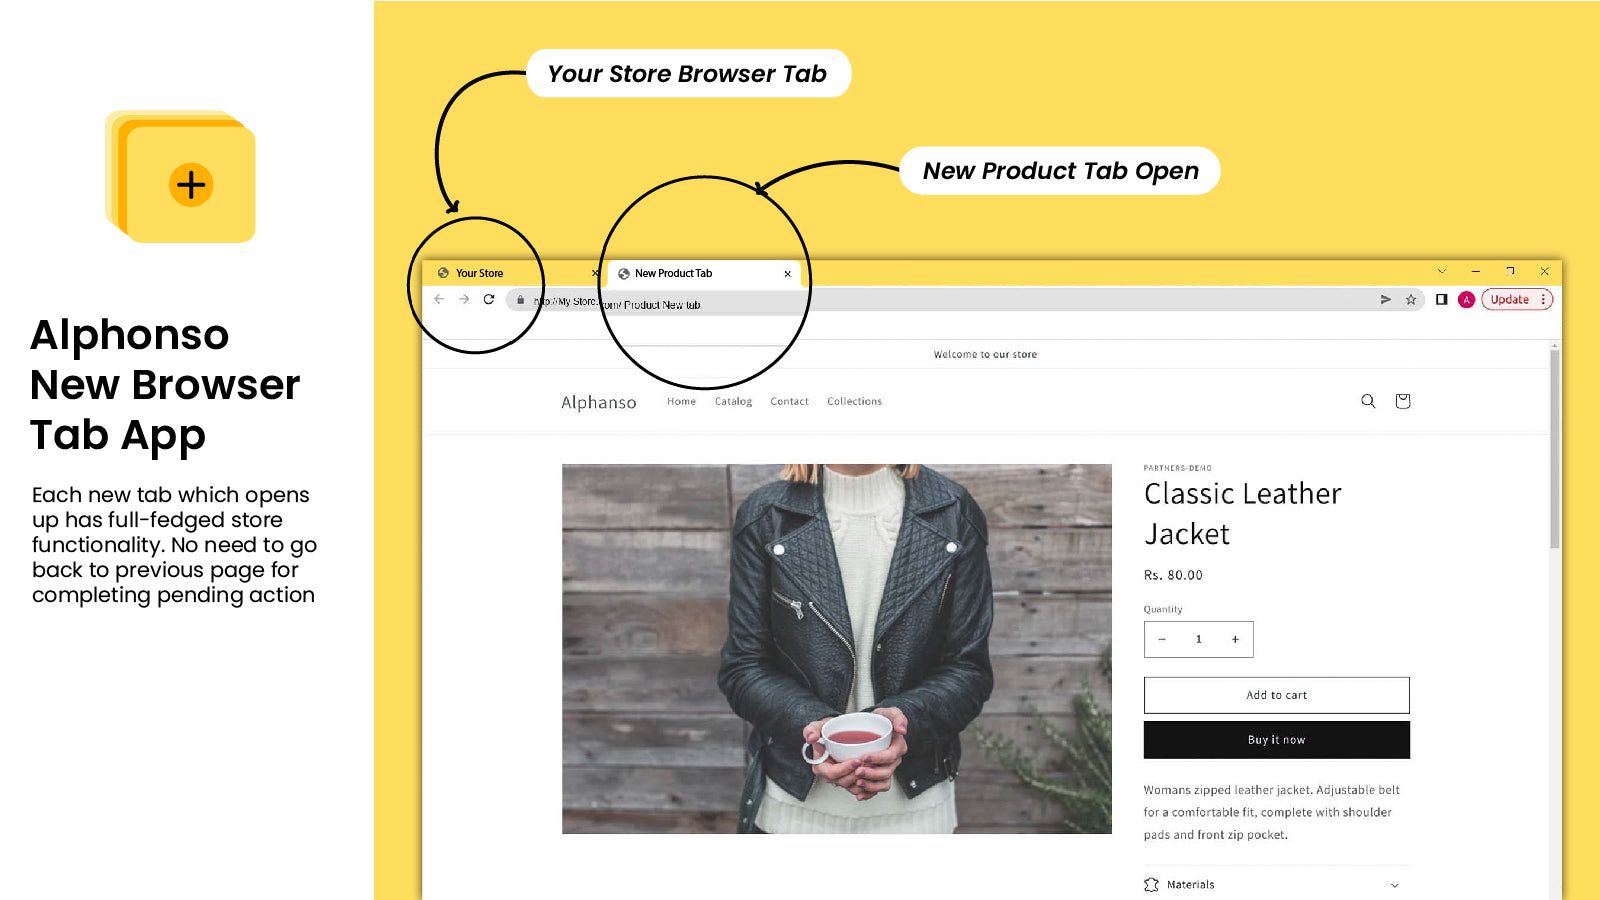 The product opens up in new window at a simple click!